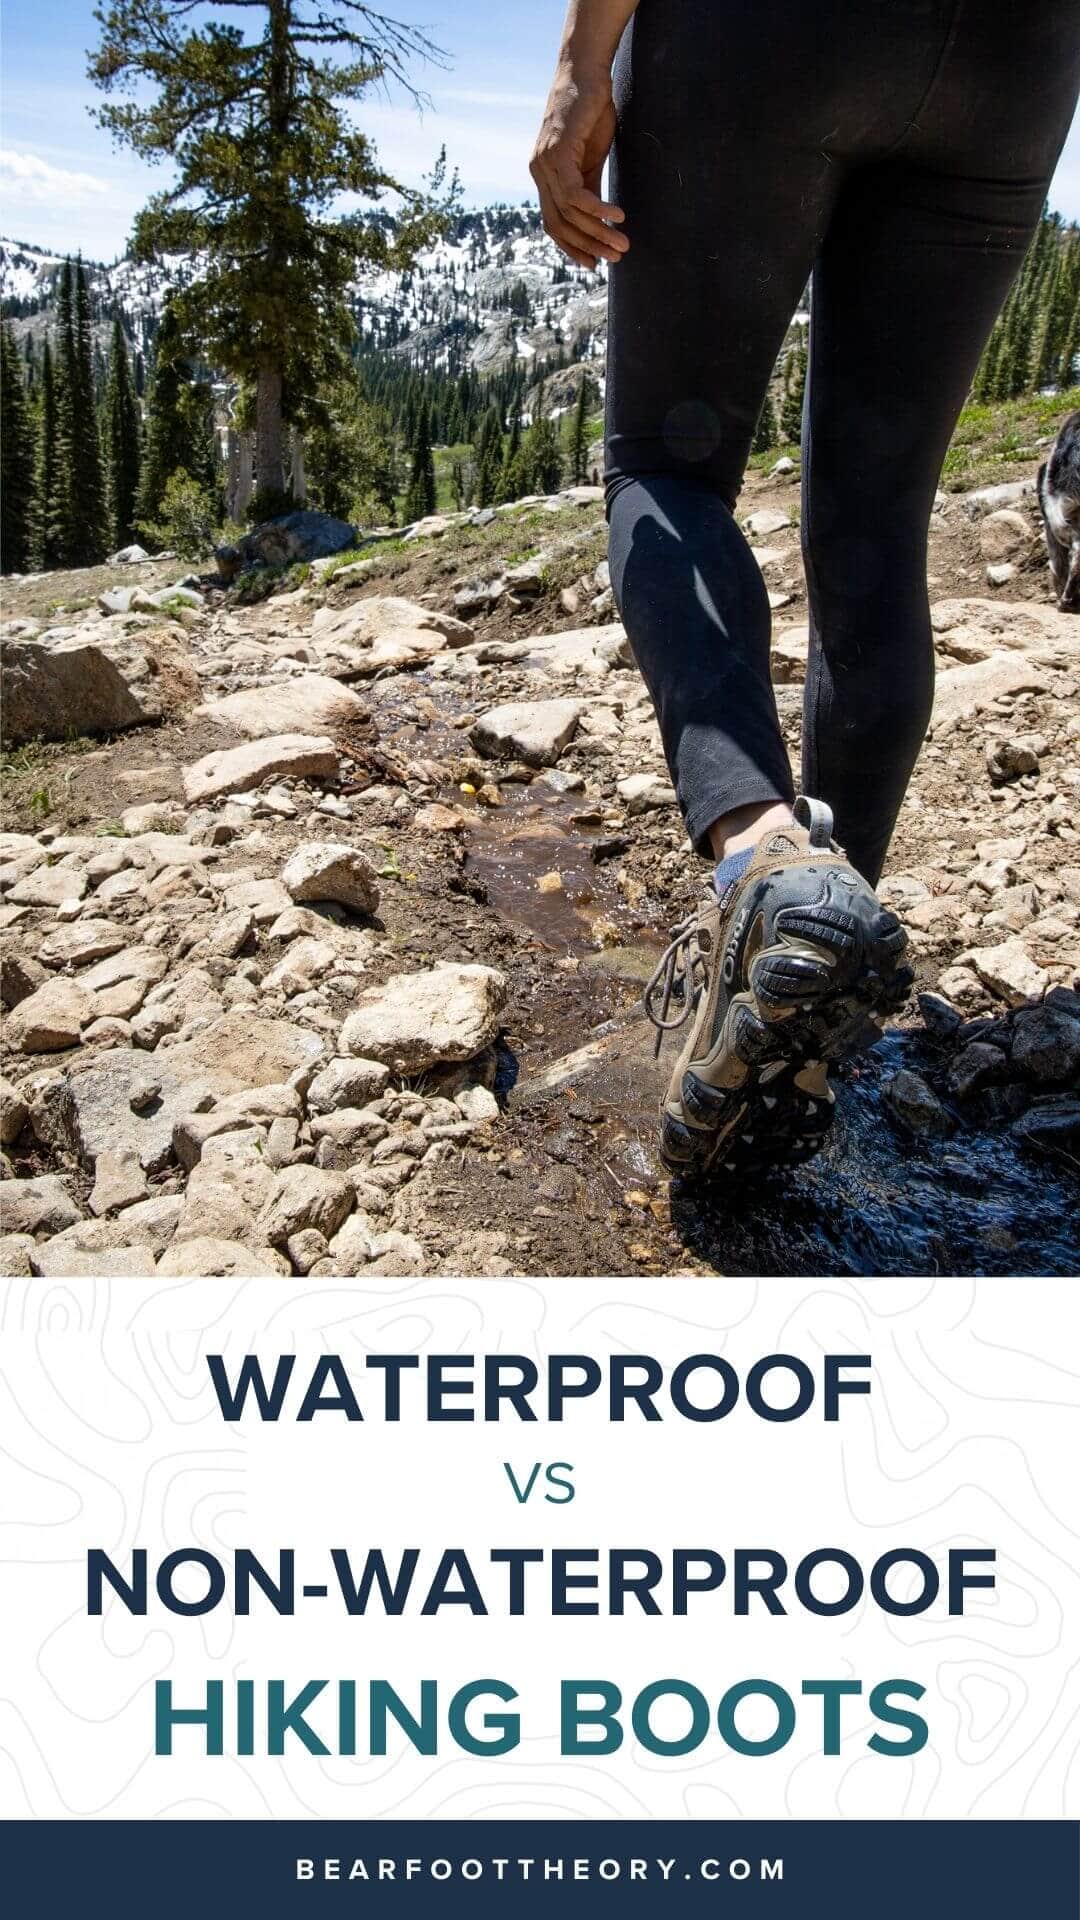 Should your hiking boots be waterproof? Learn the difference between waterproof vs non-waterproof hiking boots and which ones you need.